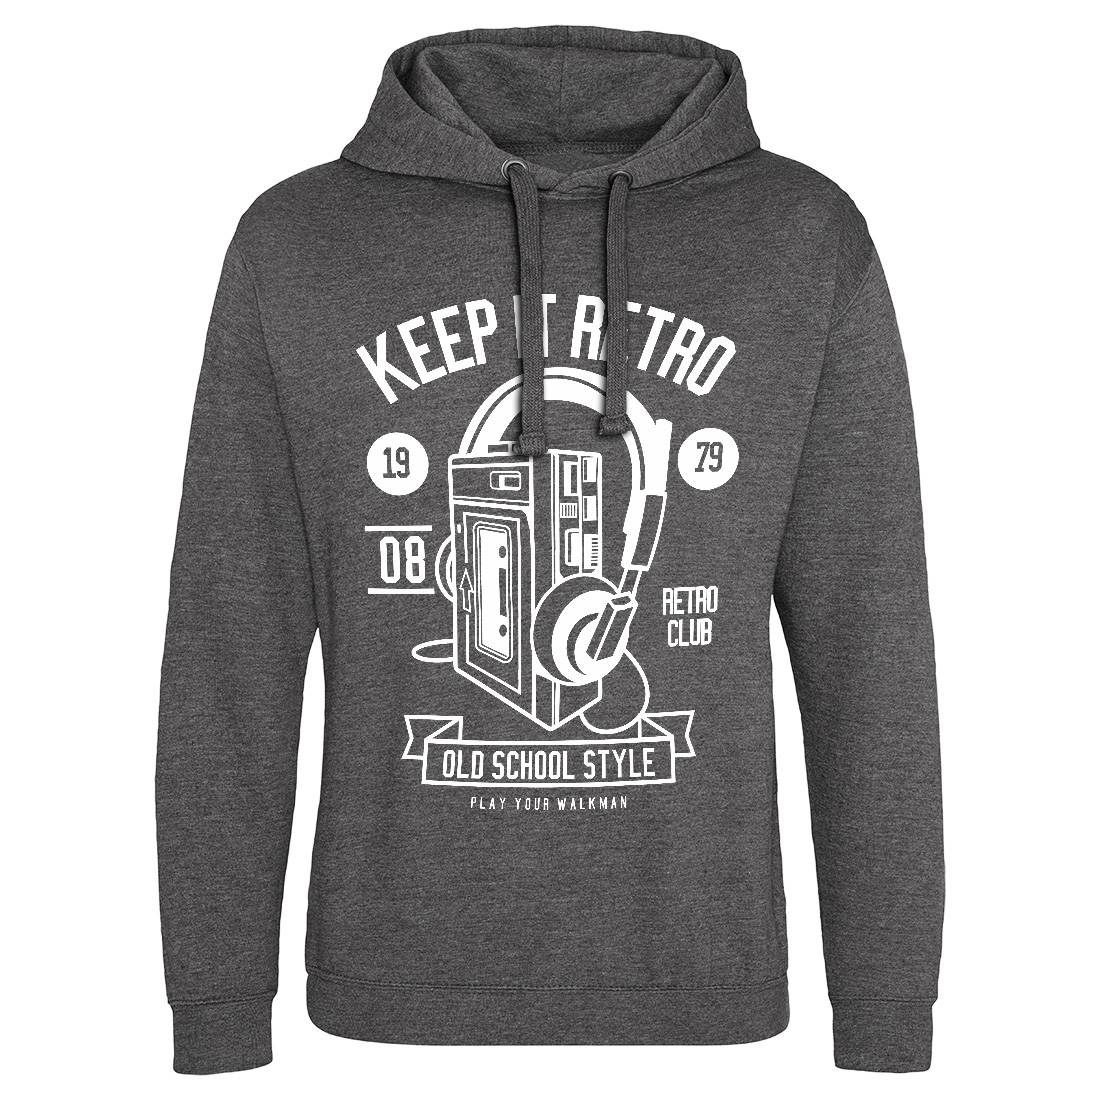 Keep It Retro Mens Hoodie Without Pocket Music B569